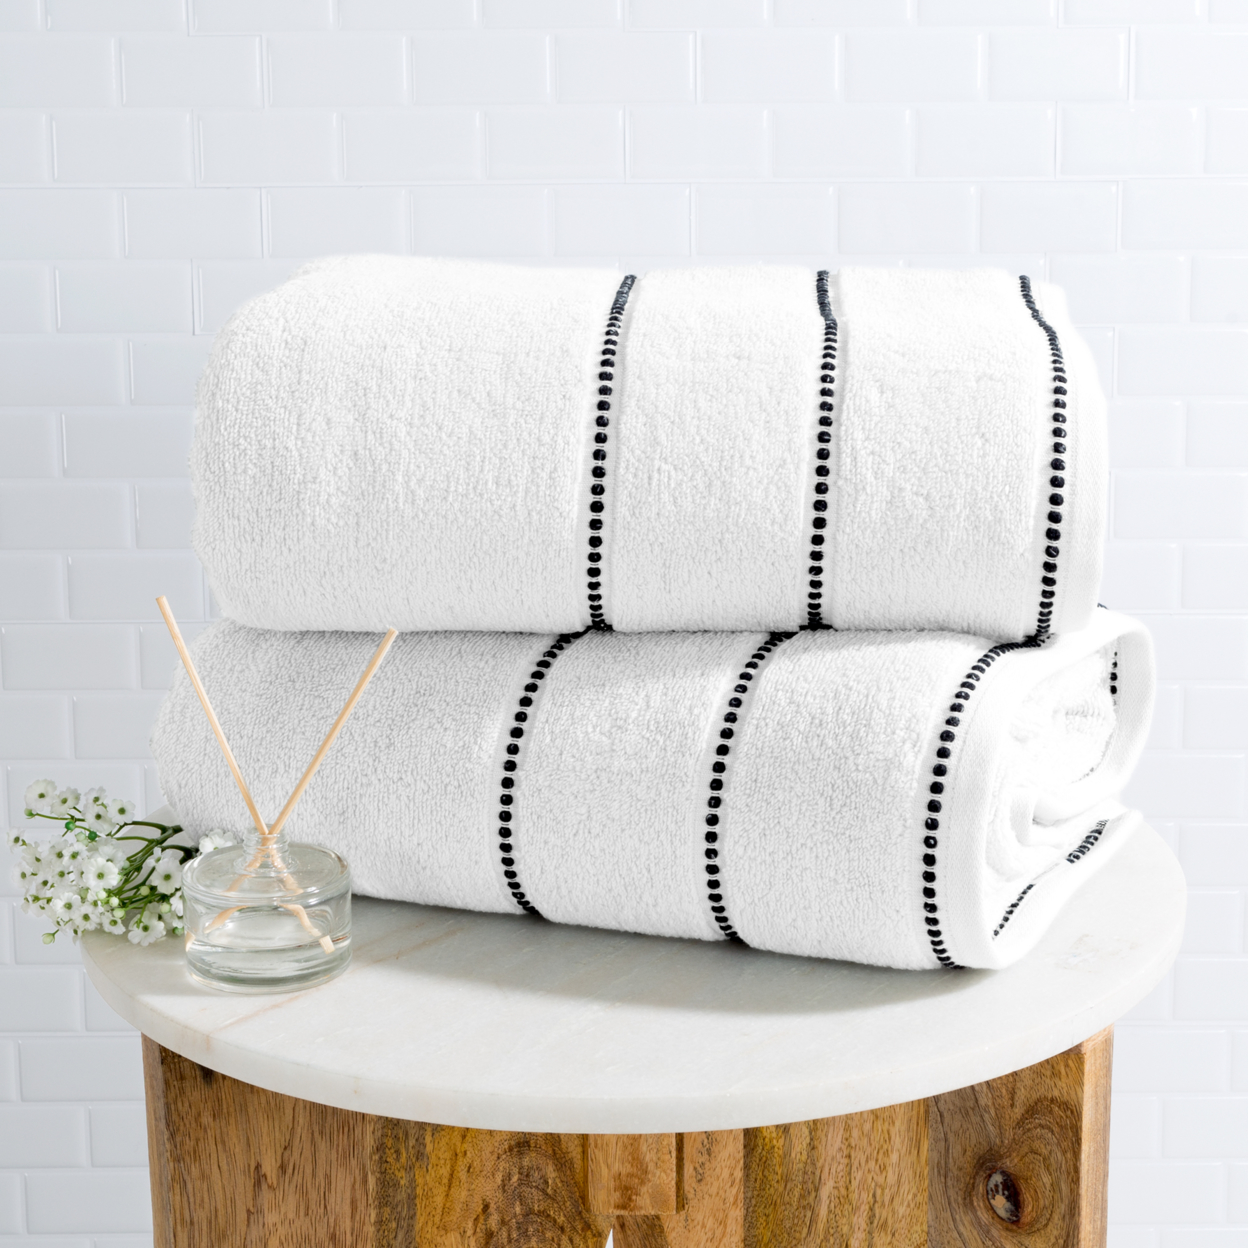 Luxurious Huge 34 X 68 In Cotton Towel Set- 2 Piece Bath Sheet Set Made From 100% Plush Cotton- Quick Dry, Soft And Absorbent White